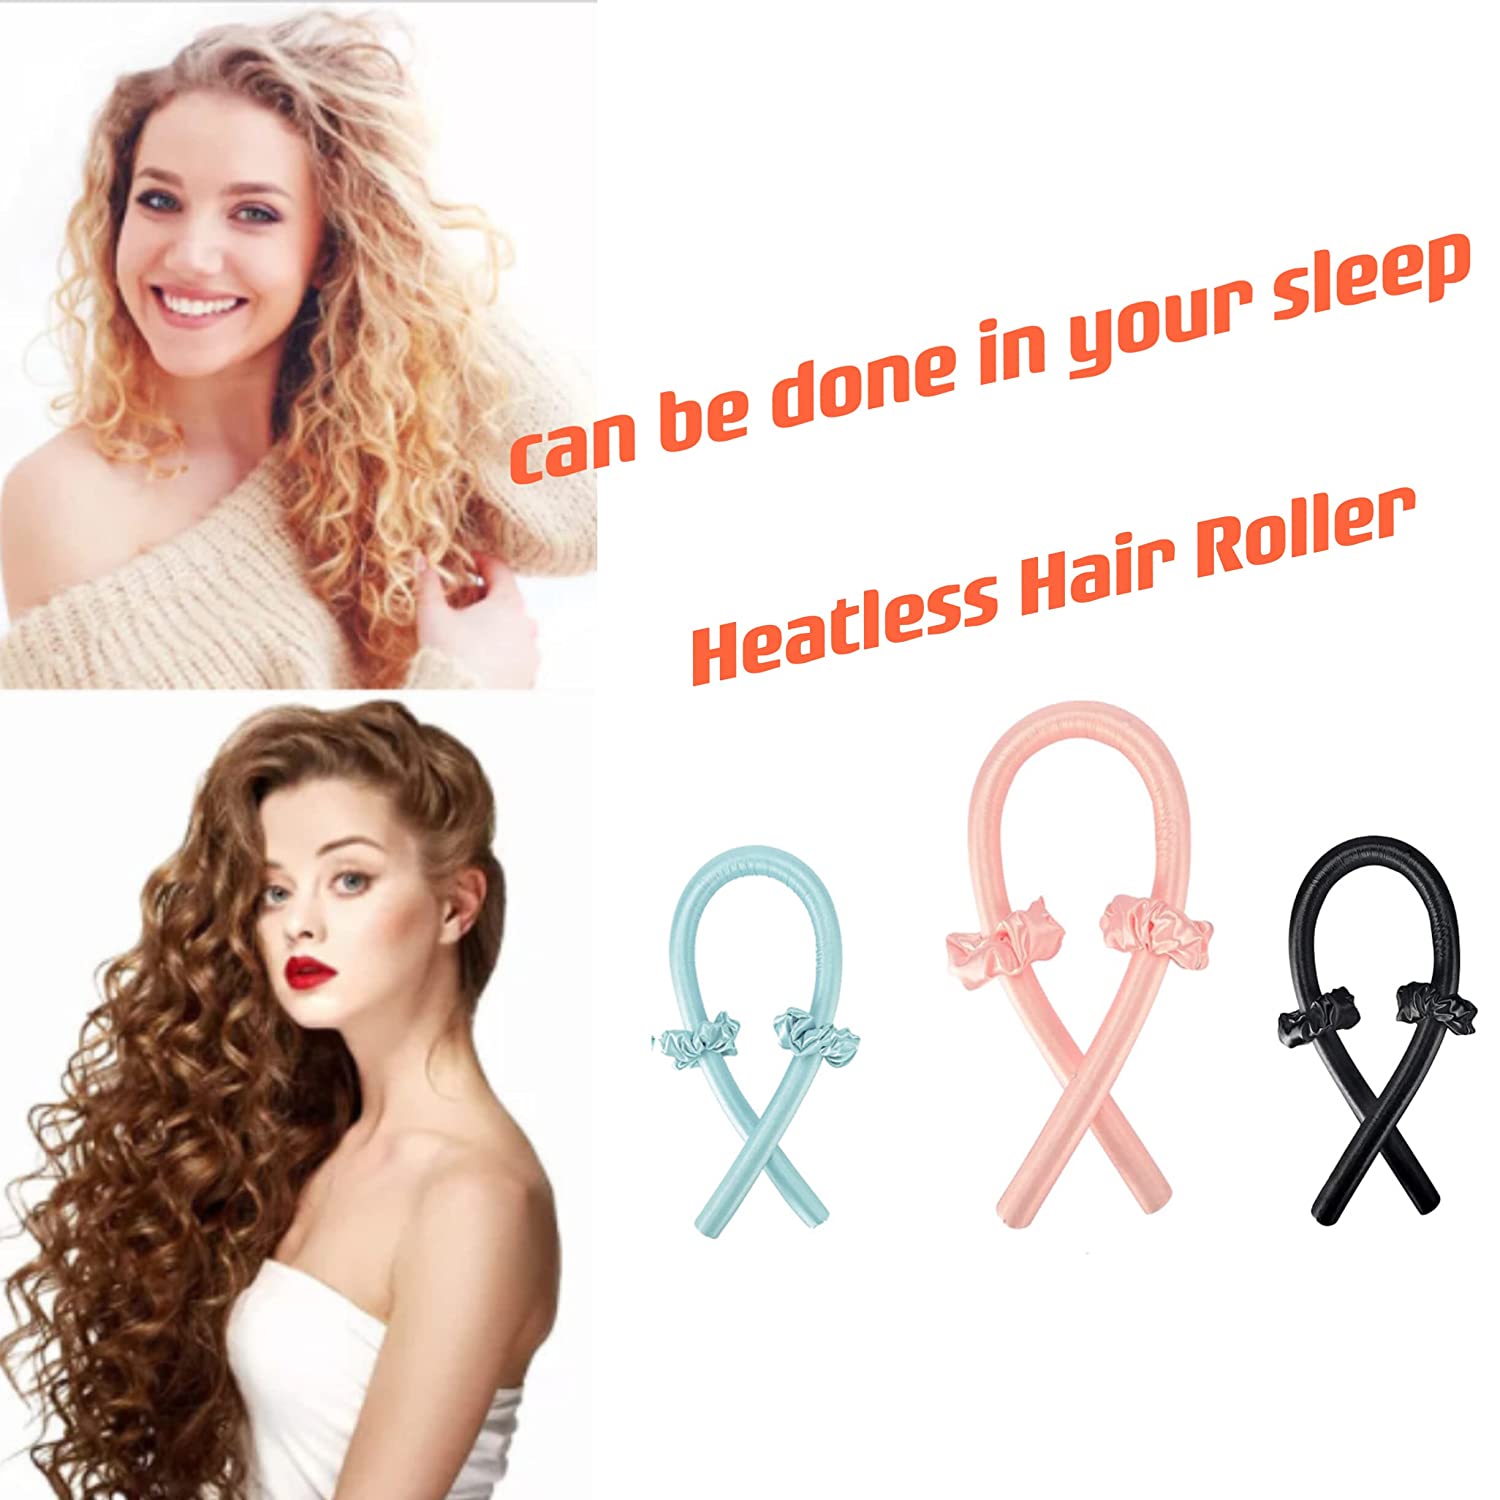 Lebexy Curls Curls Without Heat, Wave Formers Overnight, Diy Hair Curls Without Heat Hairstyle Set for Long Medium Hair, Pink, ‎pink